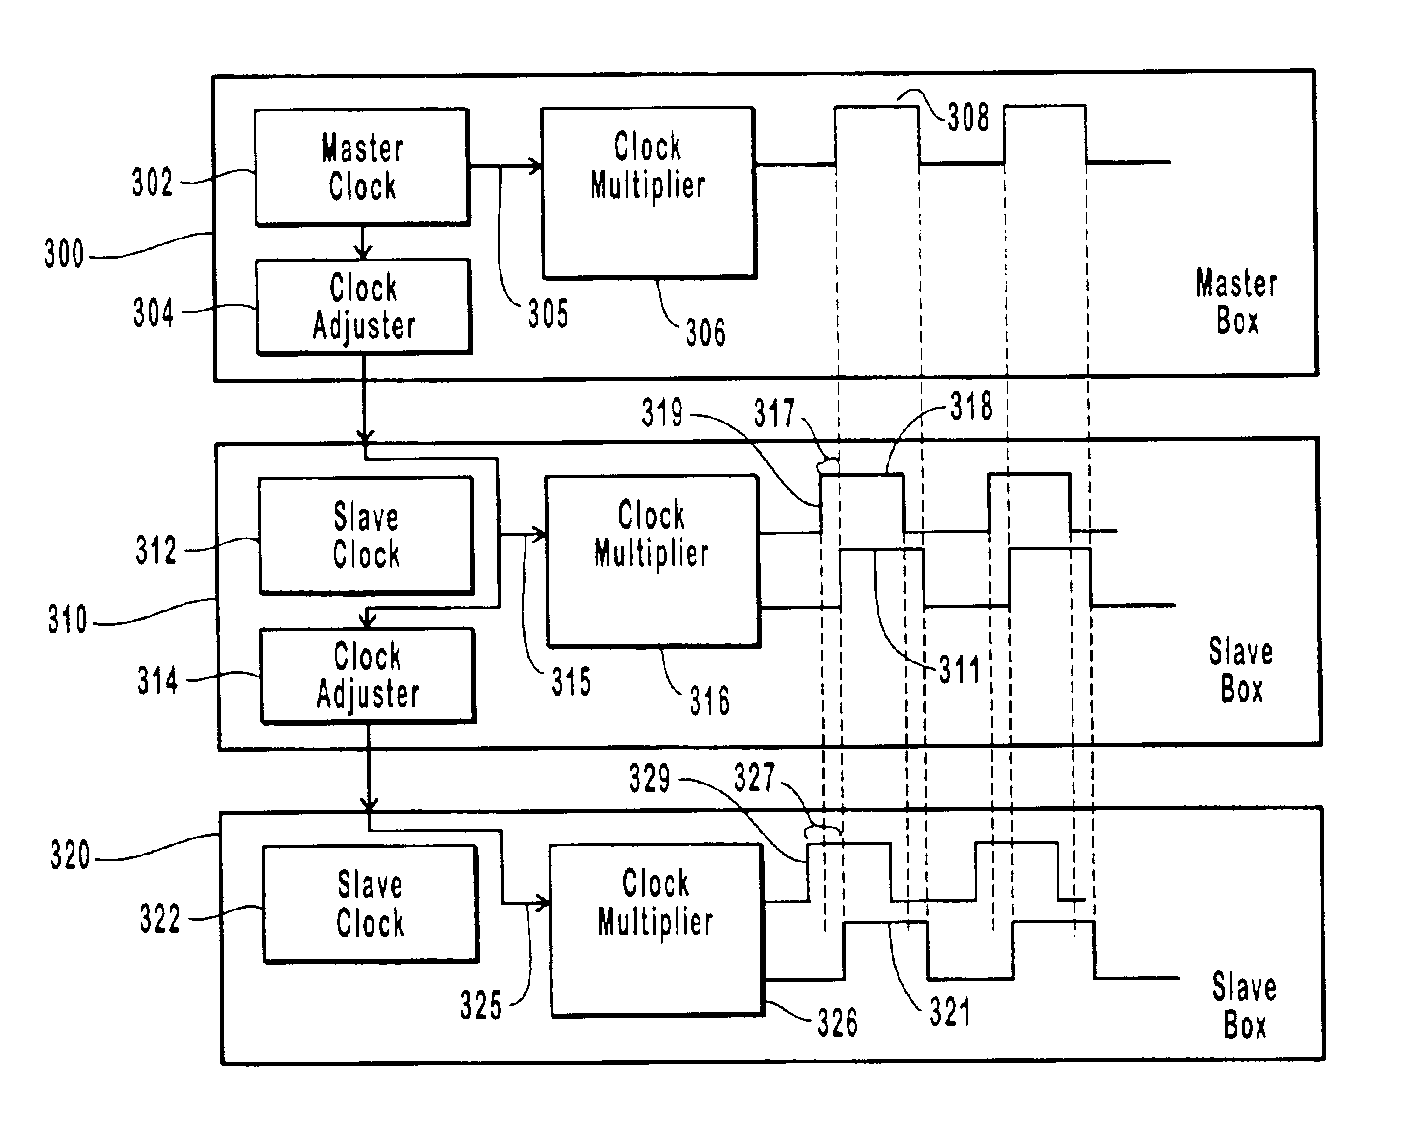 Systems and methods for synchronizing time stamps